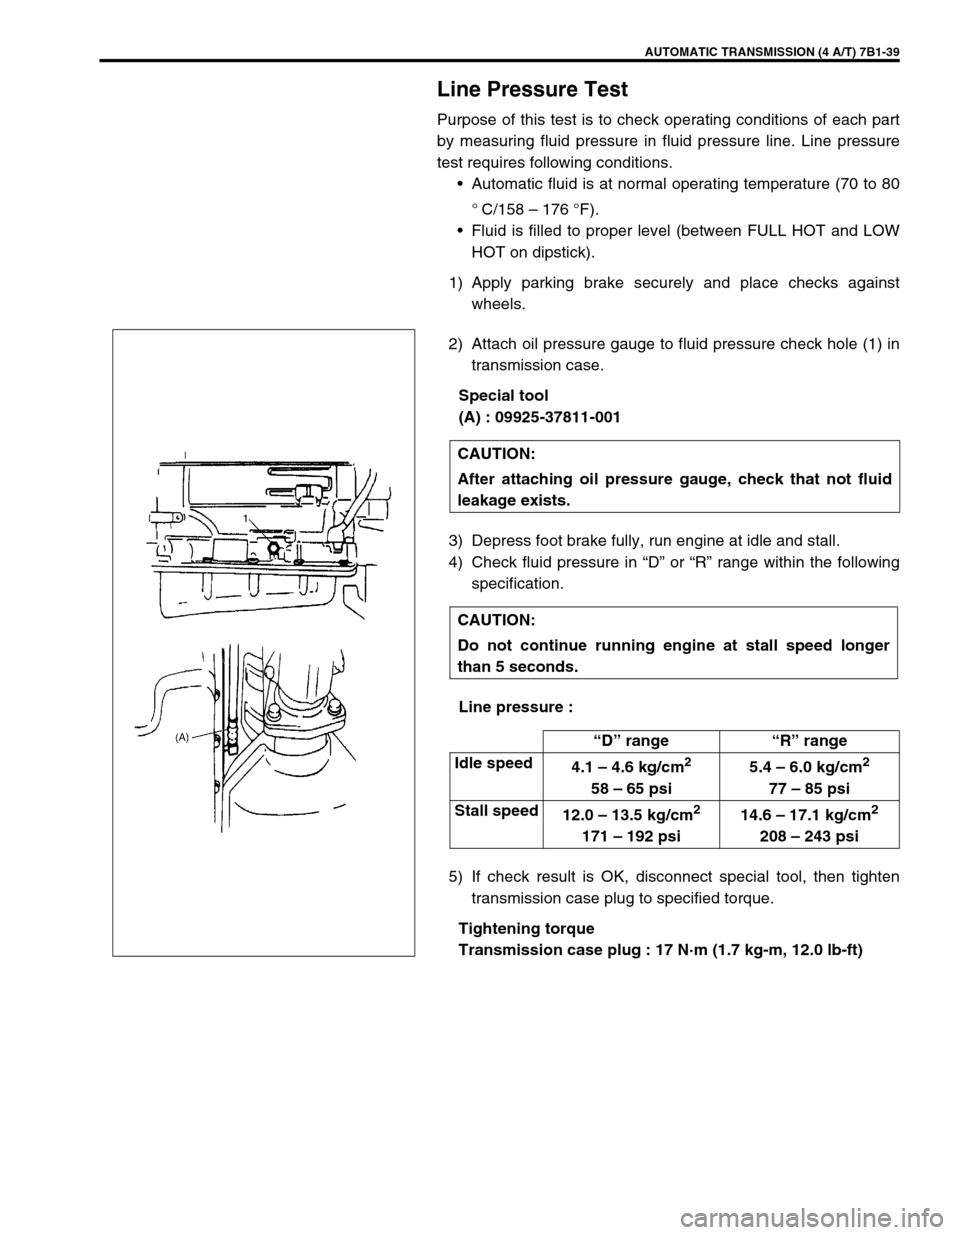 SUZUKI GRAND VITARA 1999 2.G Owners Manual AUTOMATIC TRANSMISSION (4 A/T) 7B1-39
Line Pressure Test
Purpose of this test is to check operating conditions of each part
by measuring fluid pressure in fluid pressure line. Line pressure
test requi